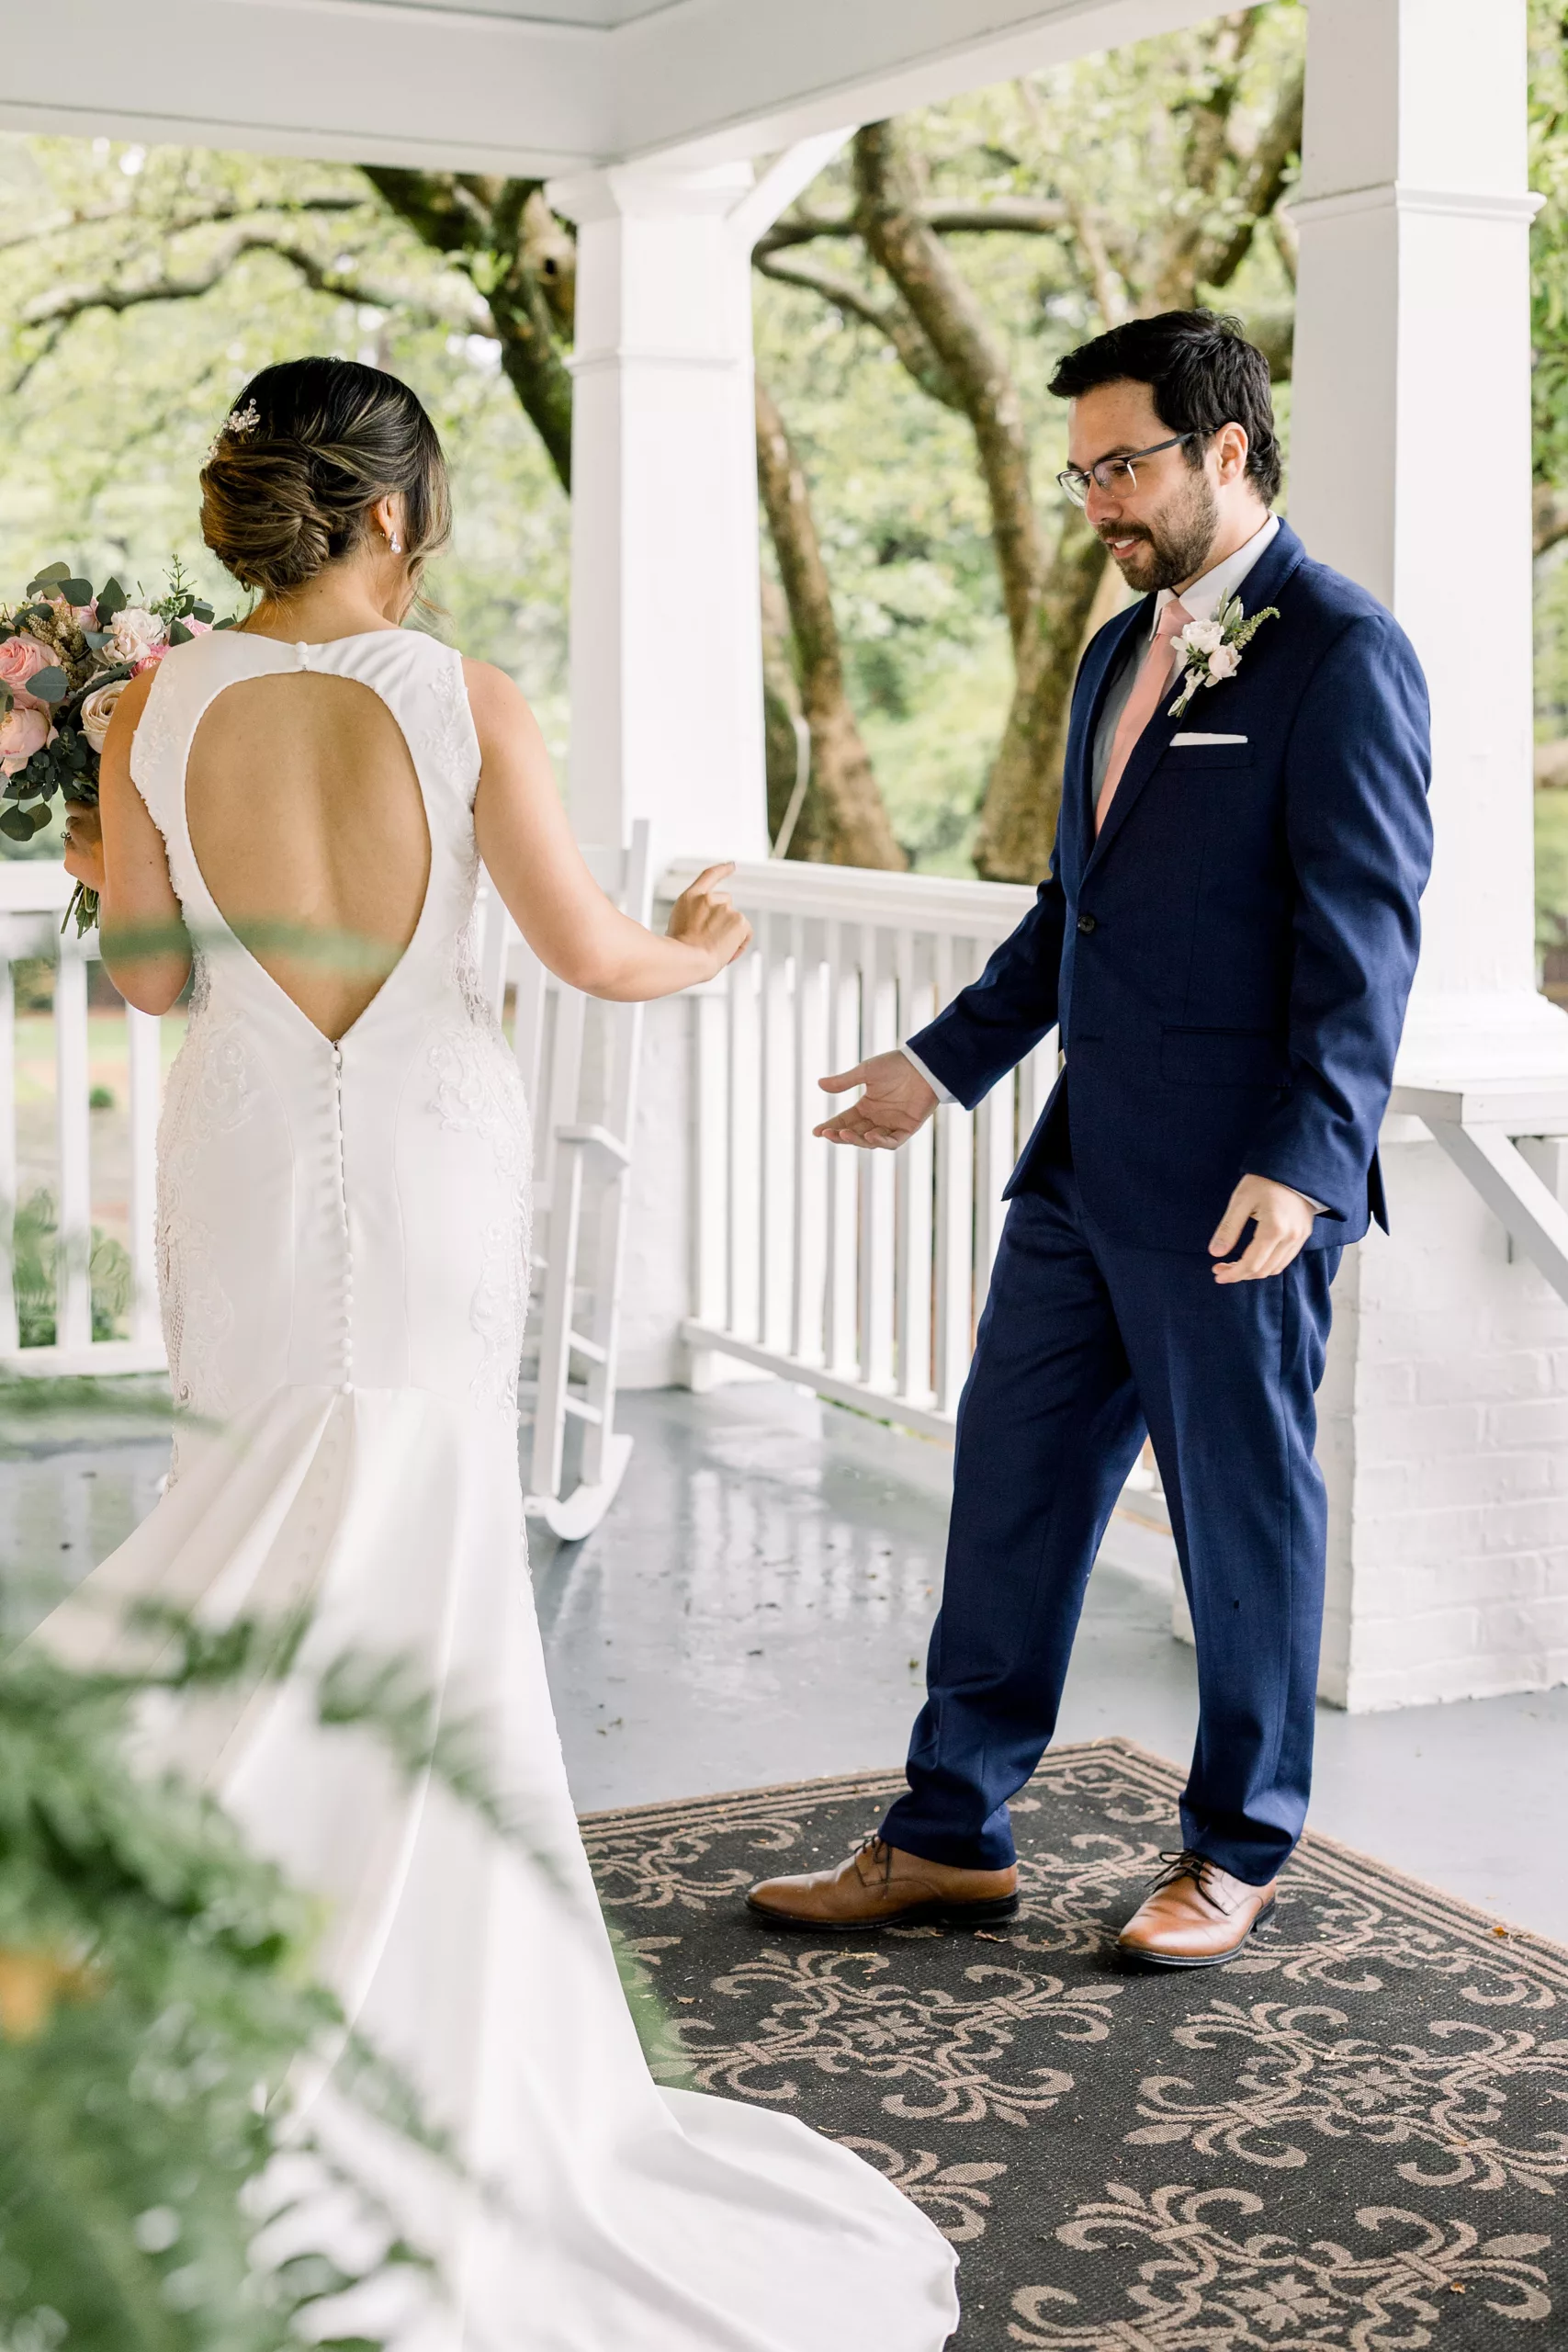 A groom in a blue suit and pink tie looks on in amazement as his bride twirls during their first look before the wedding ceremony